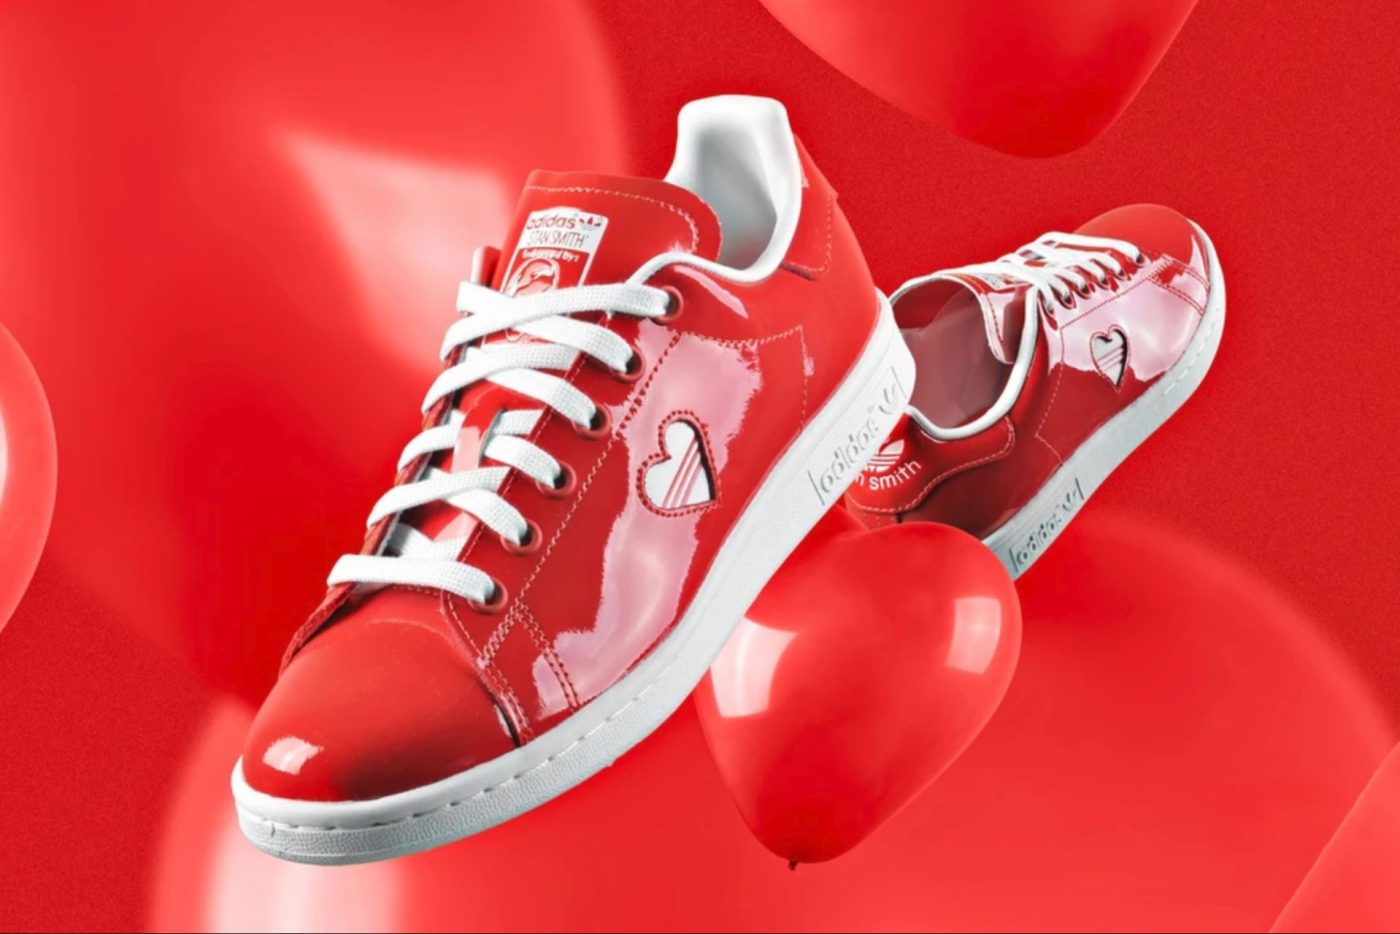 adidas Adds an Alternate Love Stan Smith to the Valentine's Day Pack-01.JPG